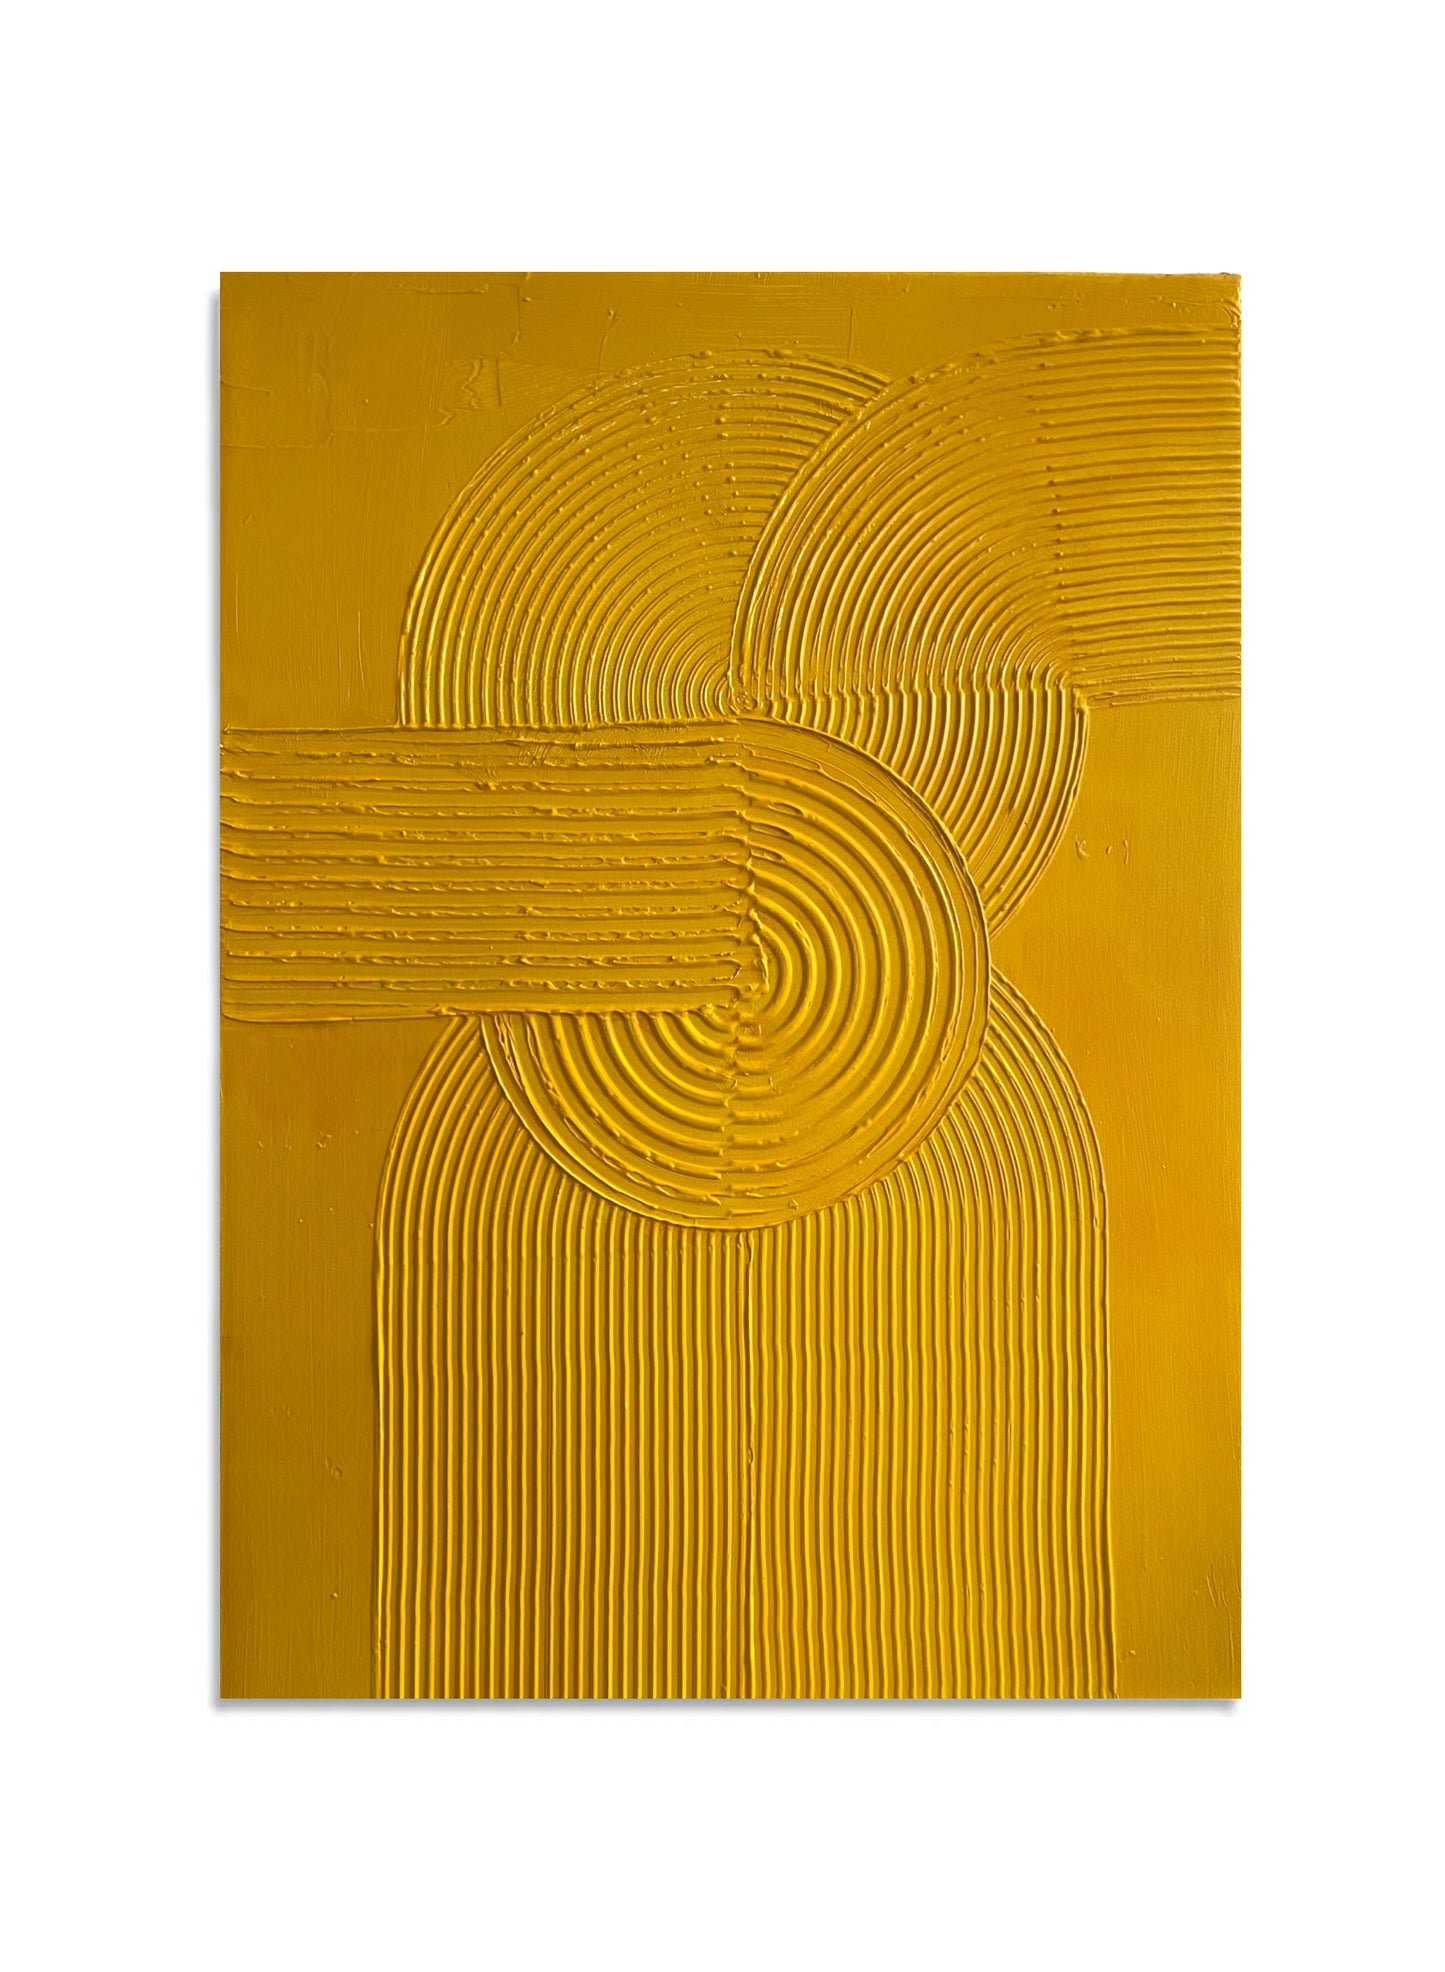 Tablou minimalist lucrat manual, in relief - "It was all yellow"